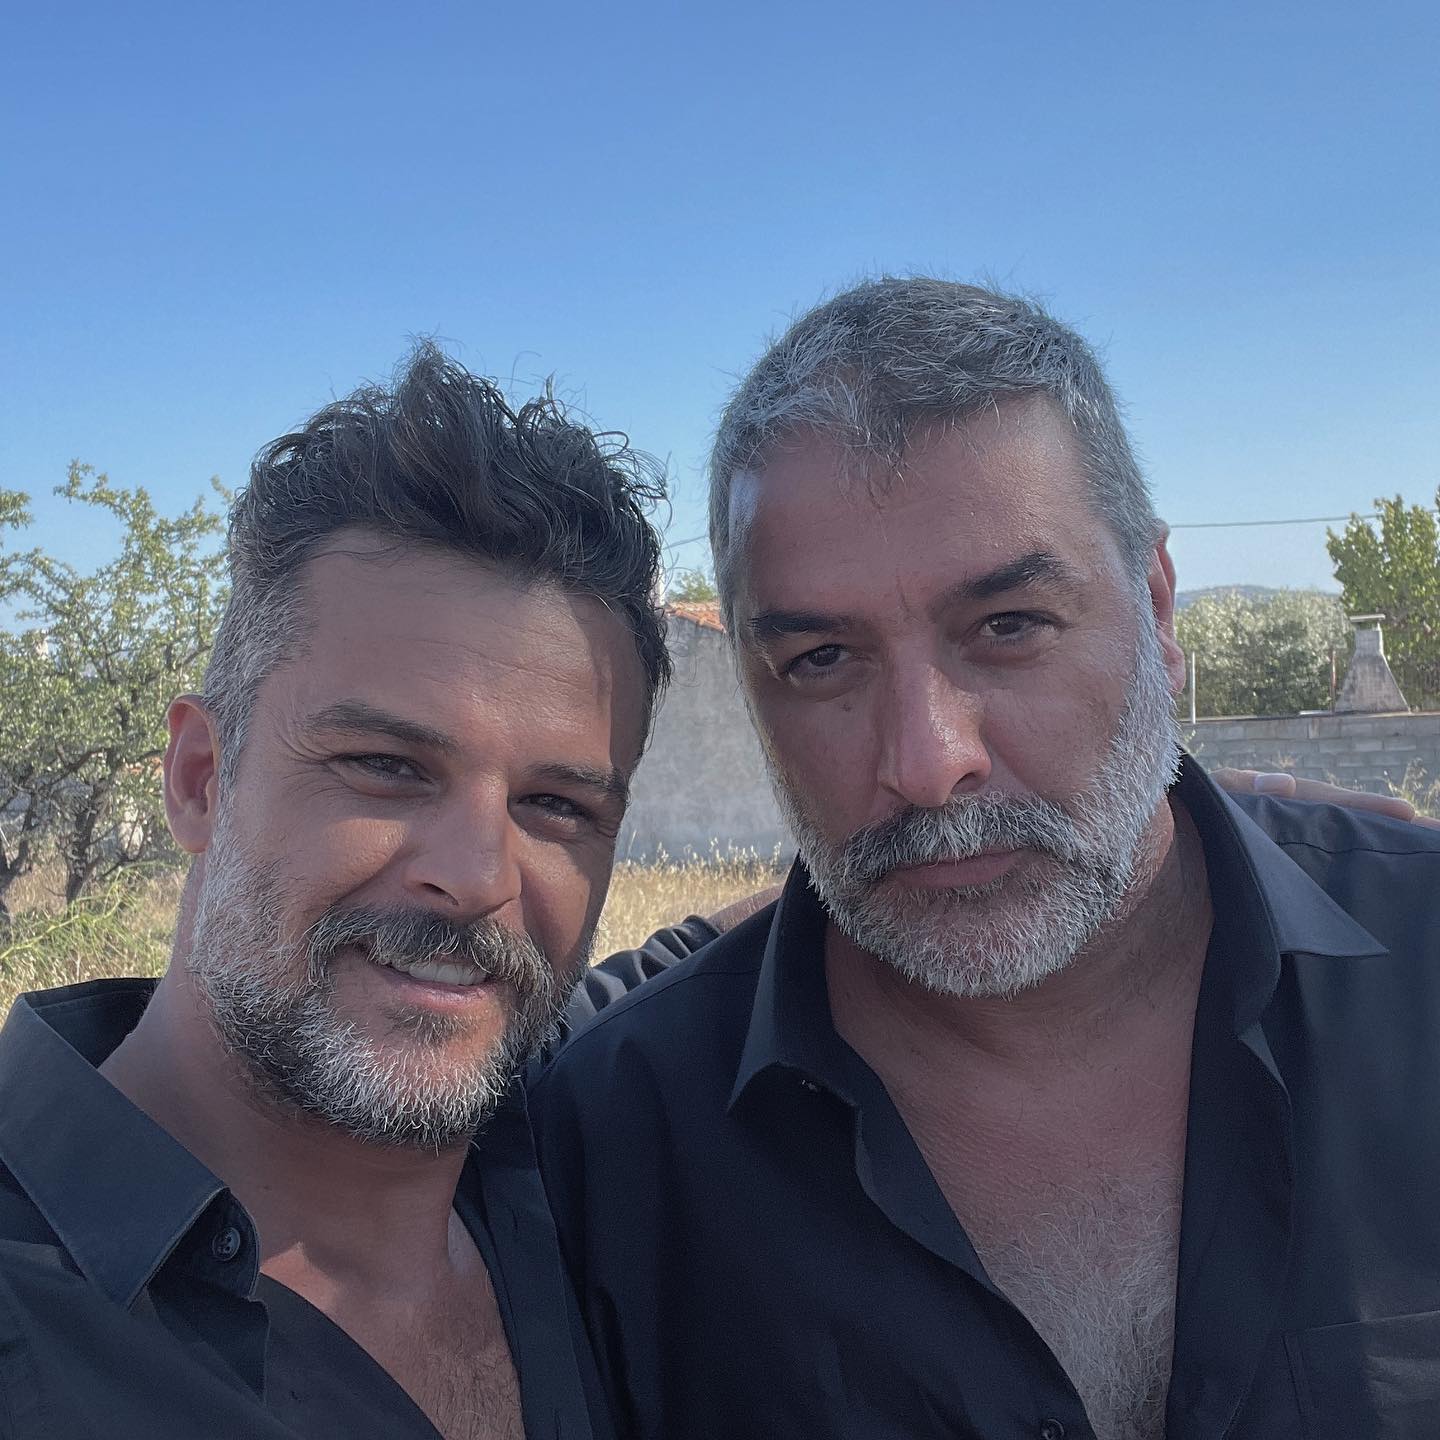 Photo by Tsoleridis Nikos official in Athens Greece with @bisbikis.vasilis. May be an image of 2 people and beard